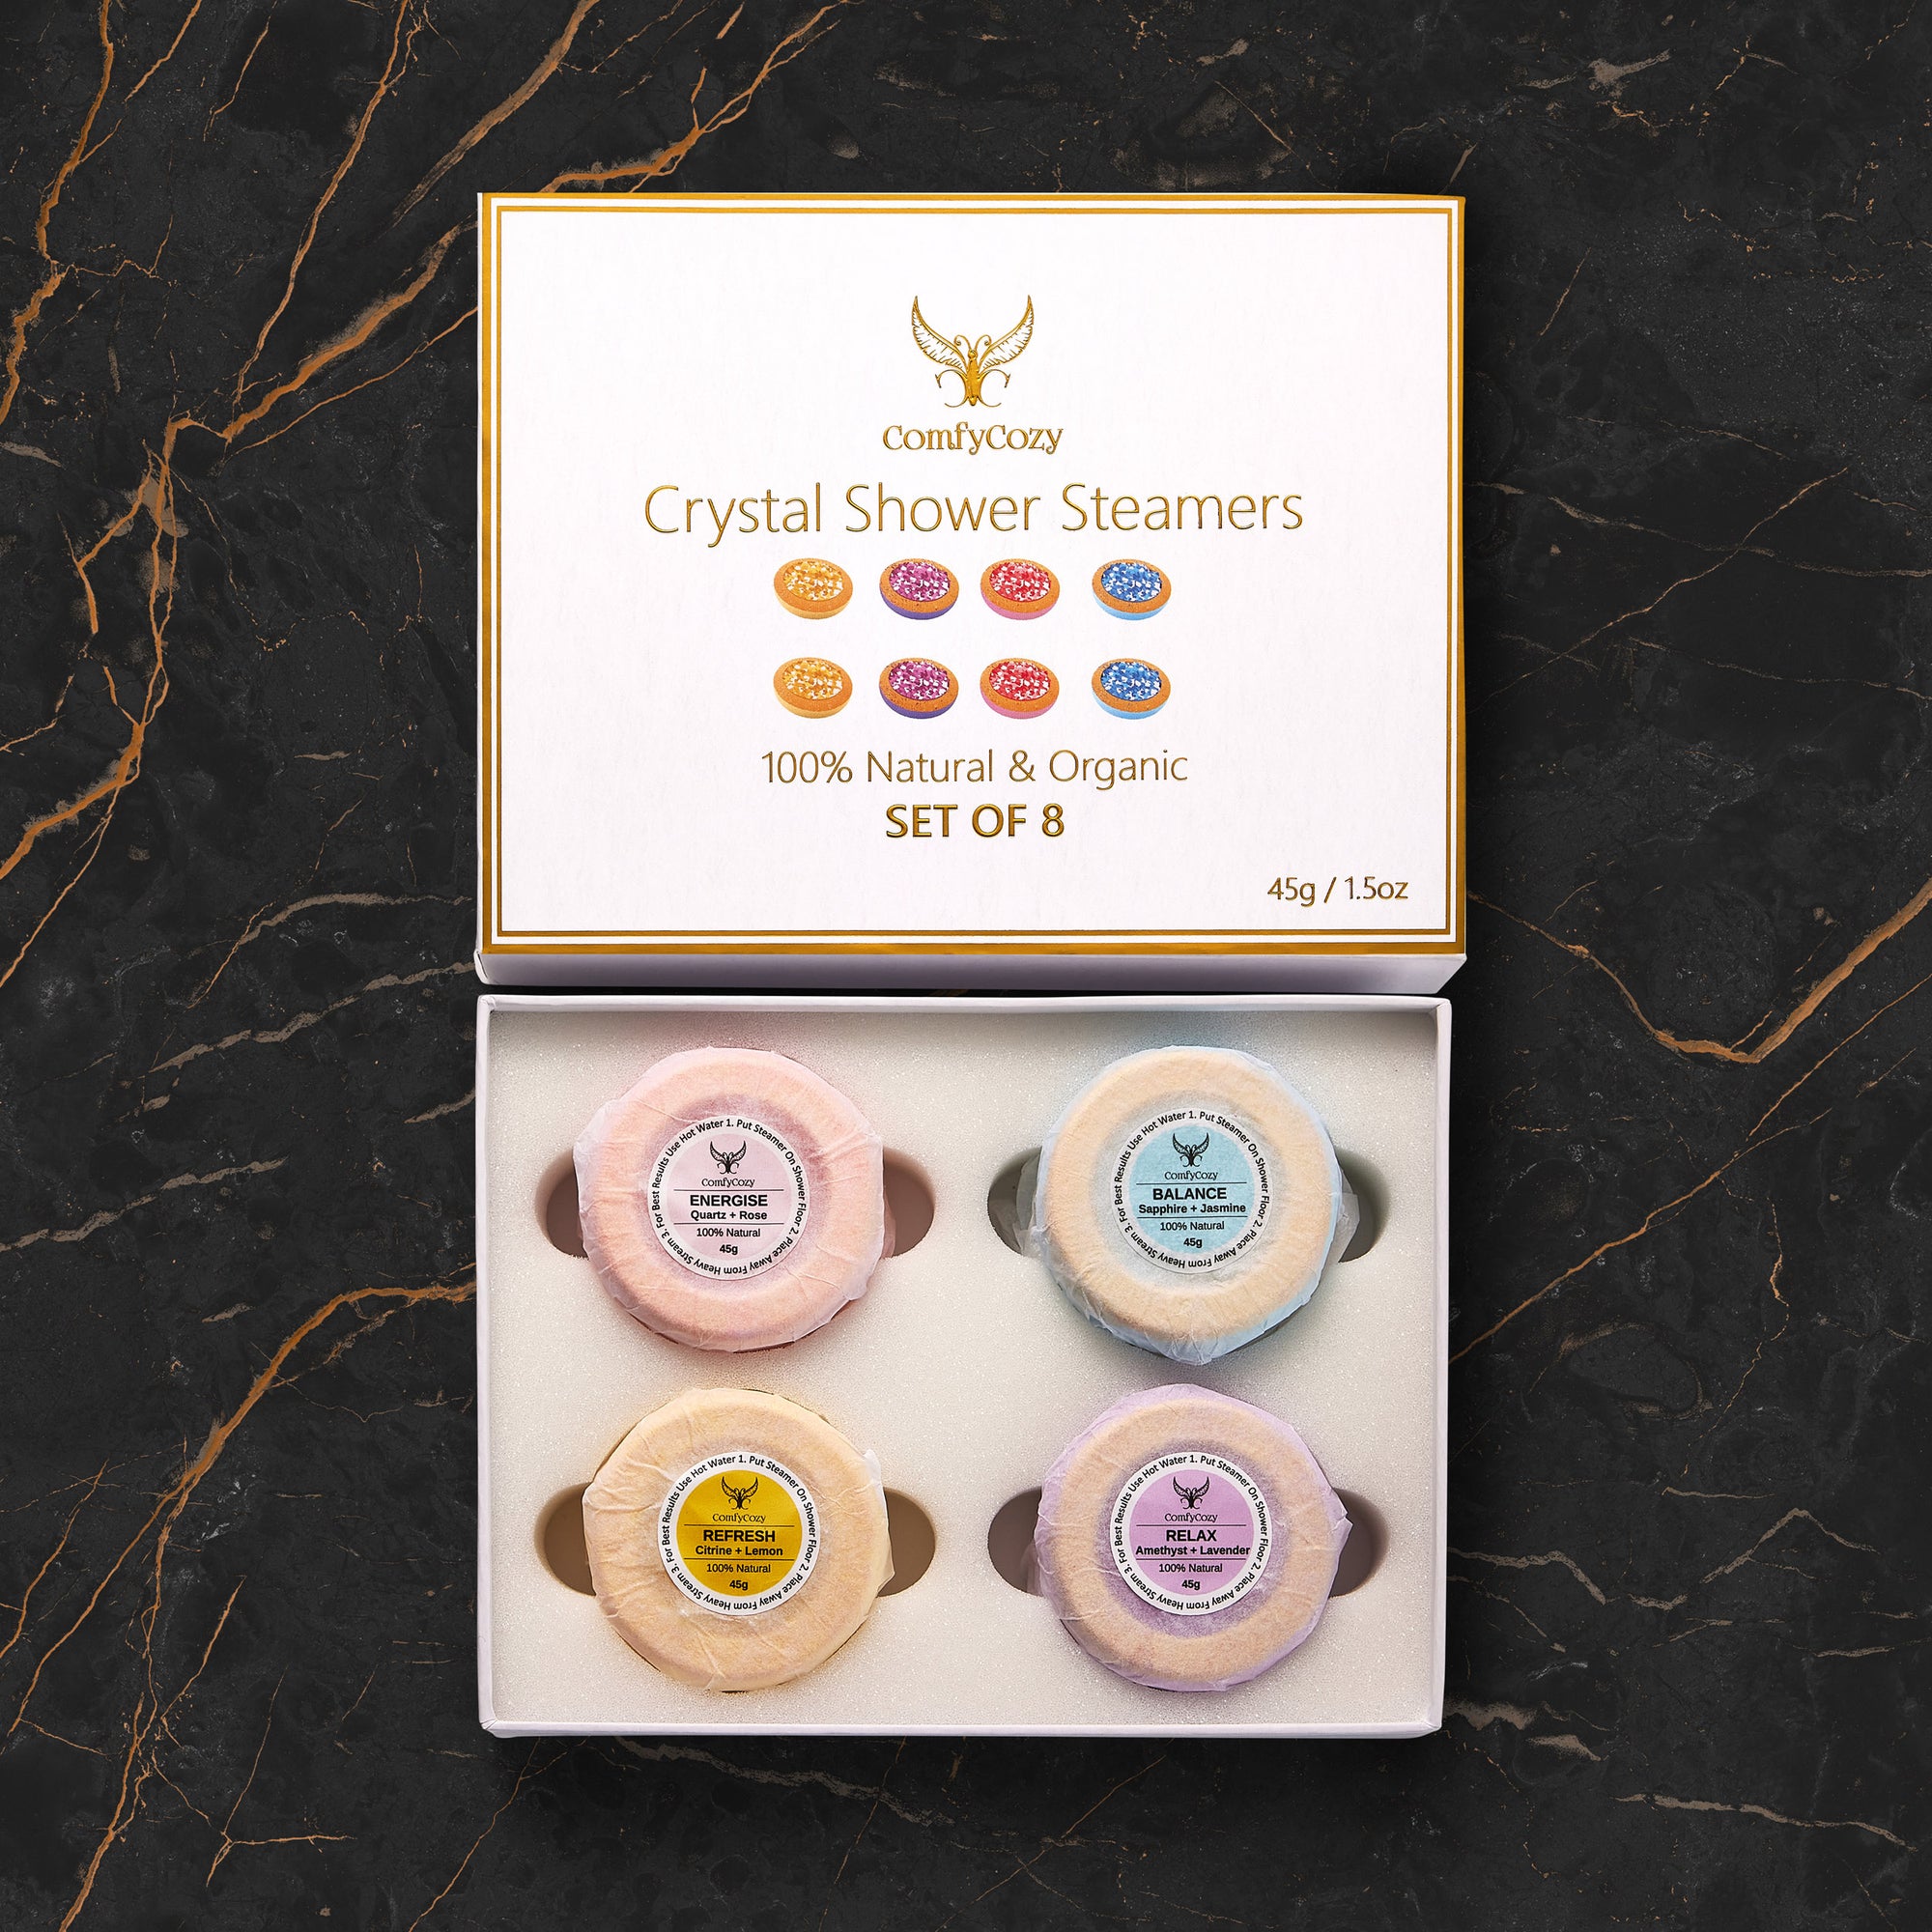 ComfyCozy Crystal Shower Steamers